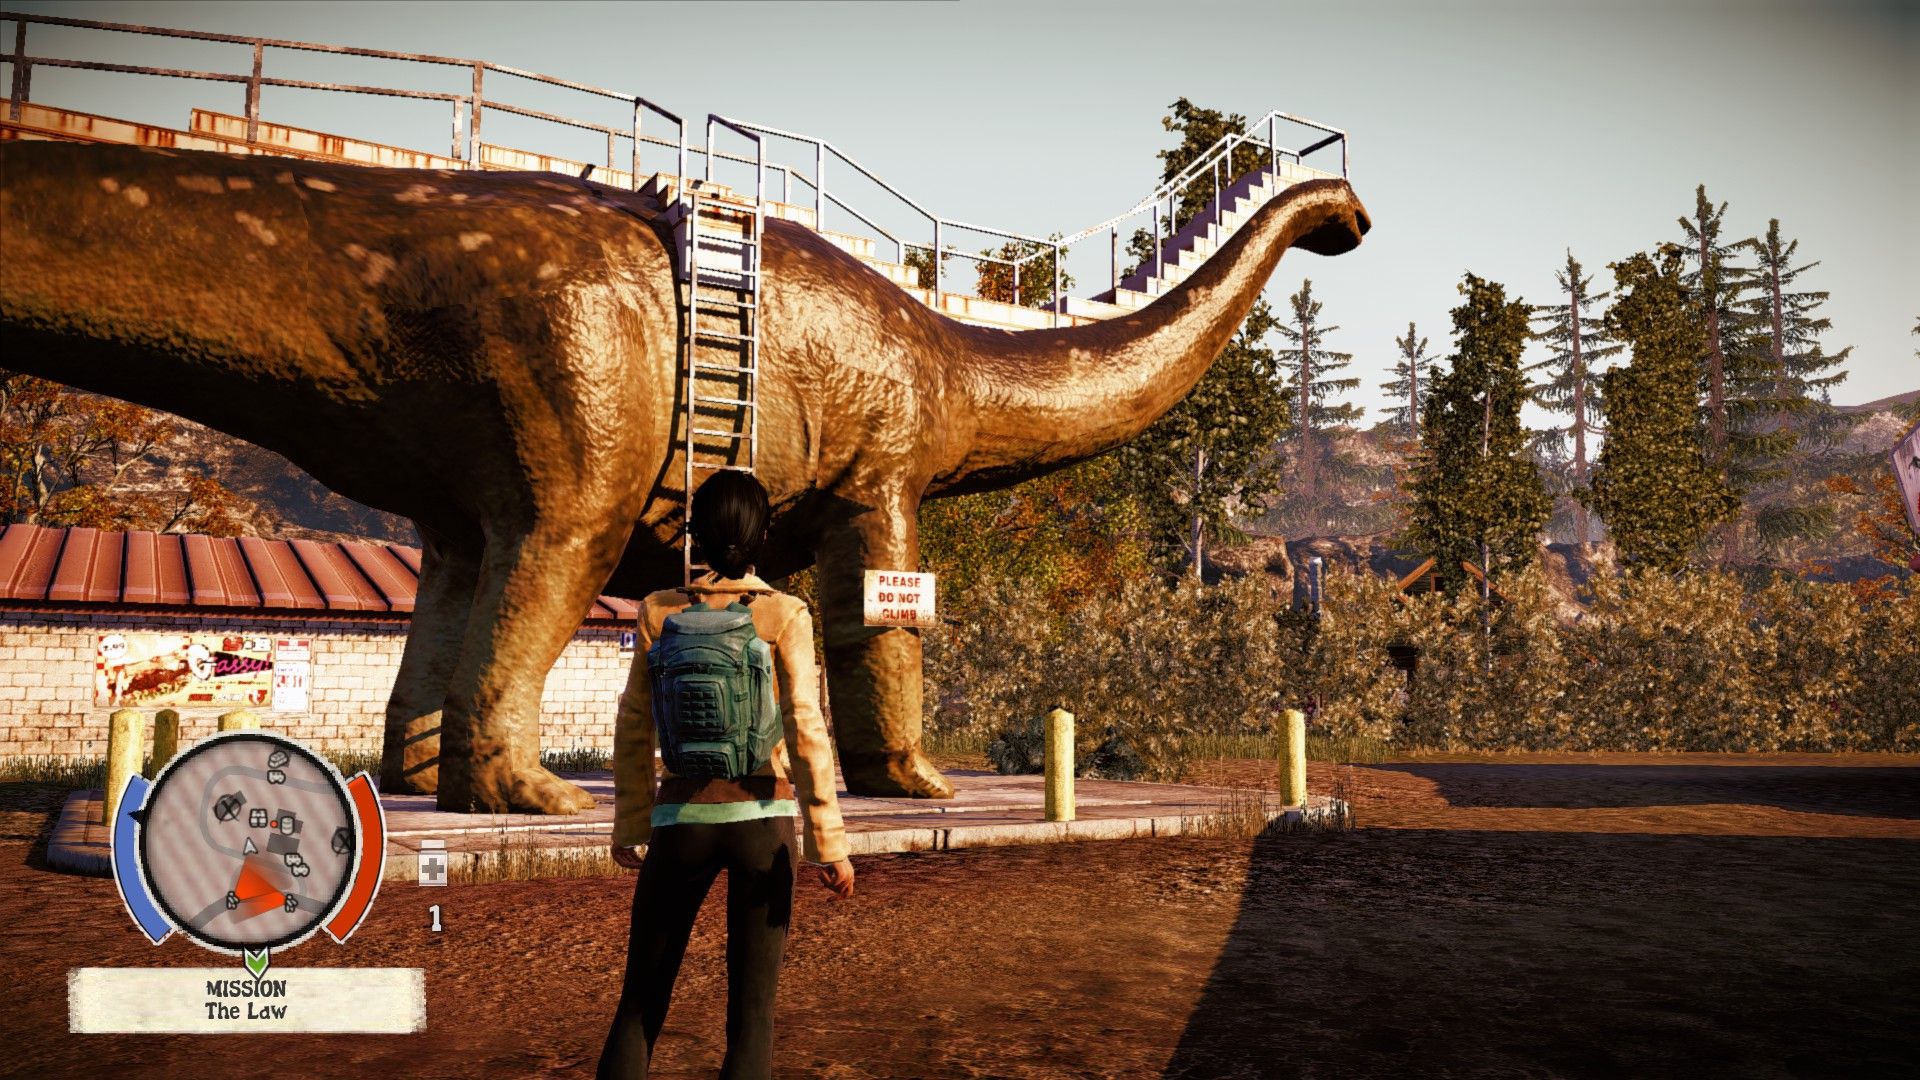 will state of decay 3 be on xbox one